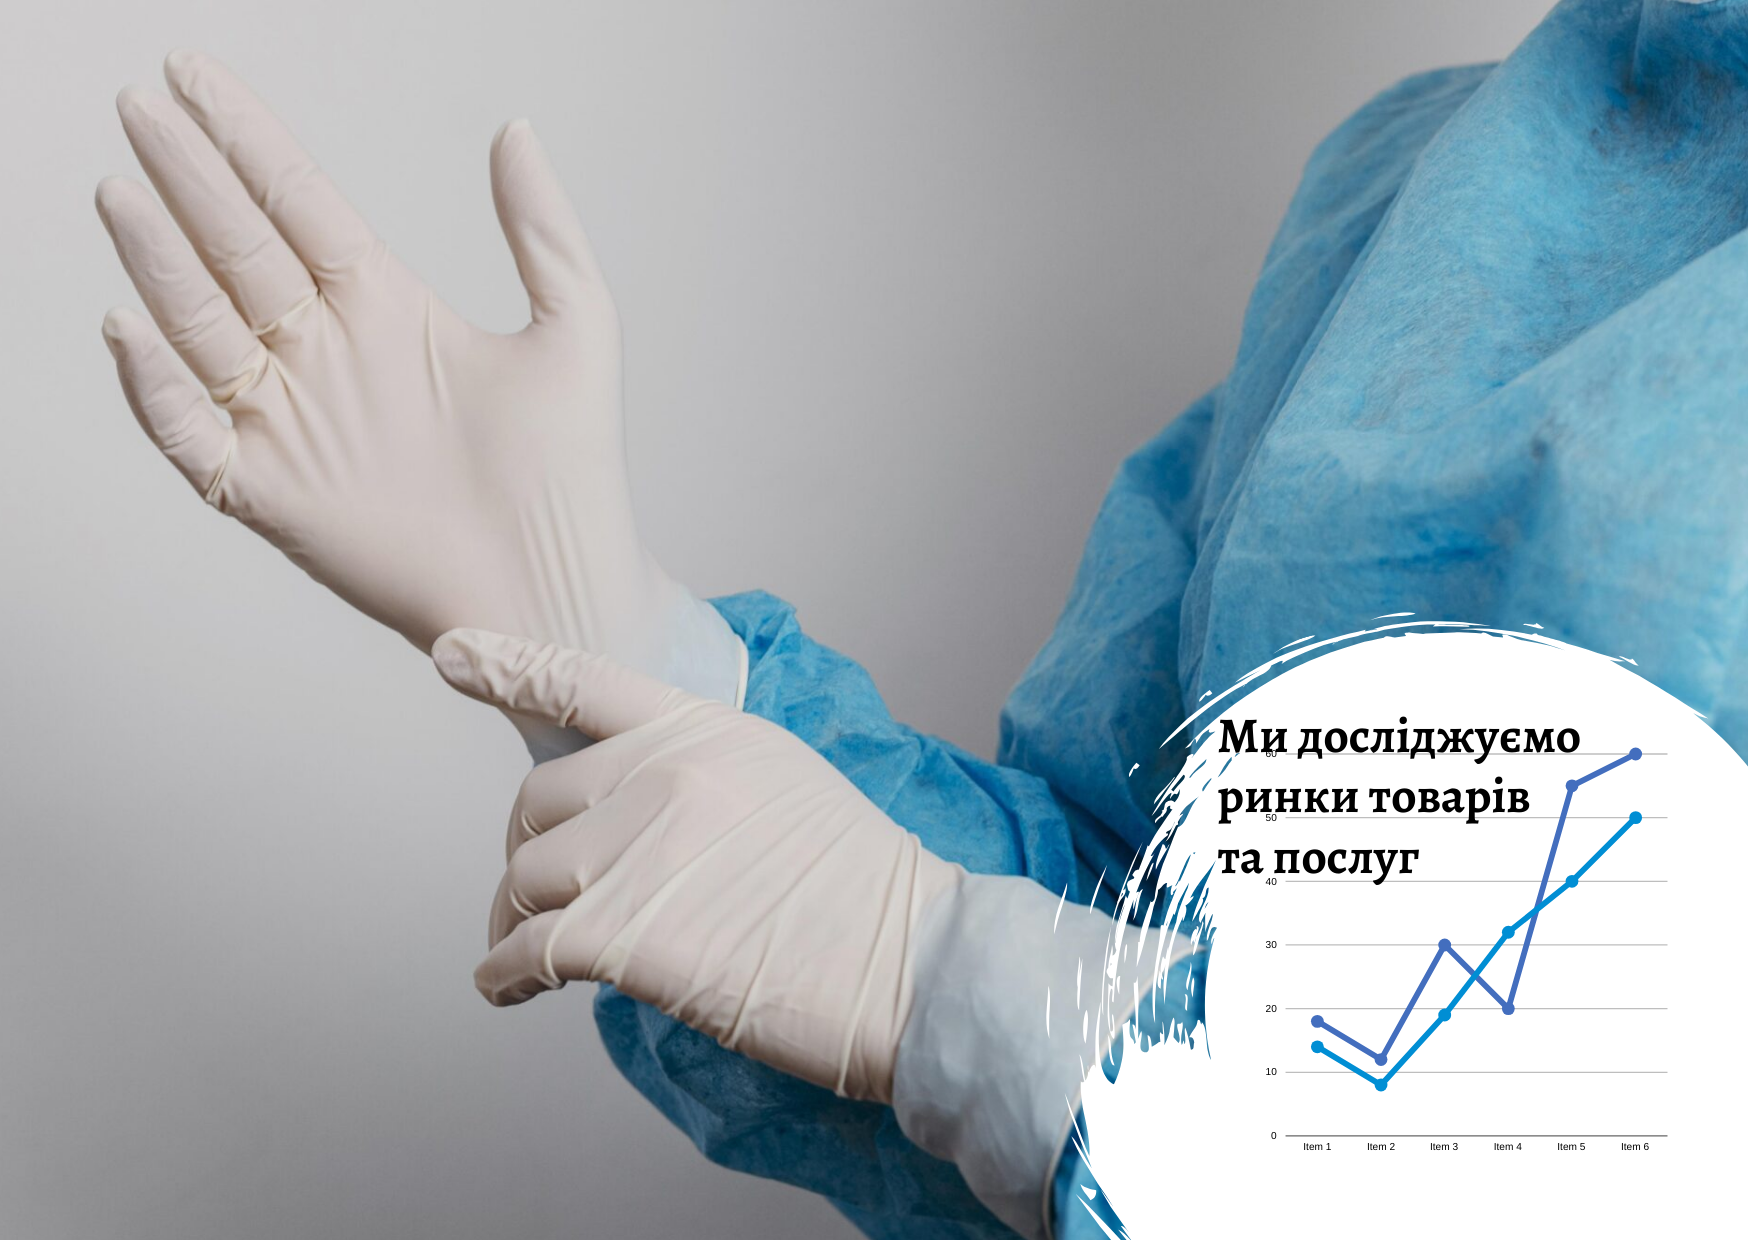 Ukrainian medical and specialized gloves market: current situation and short-term forecast